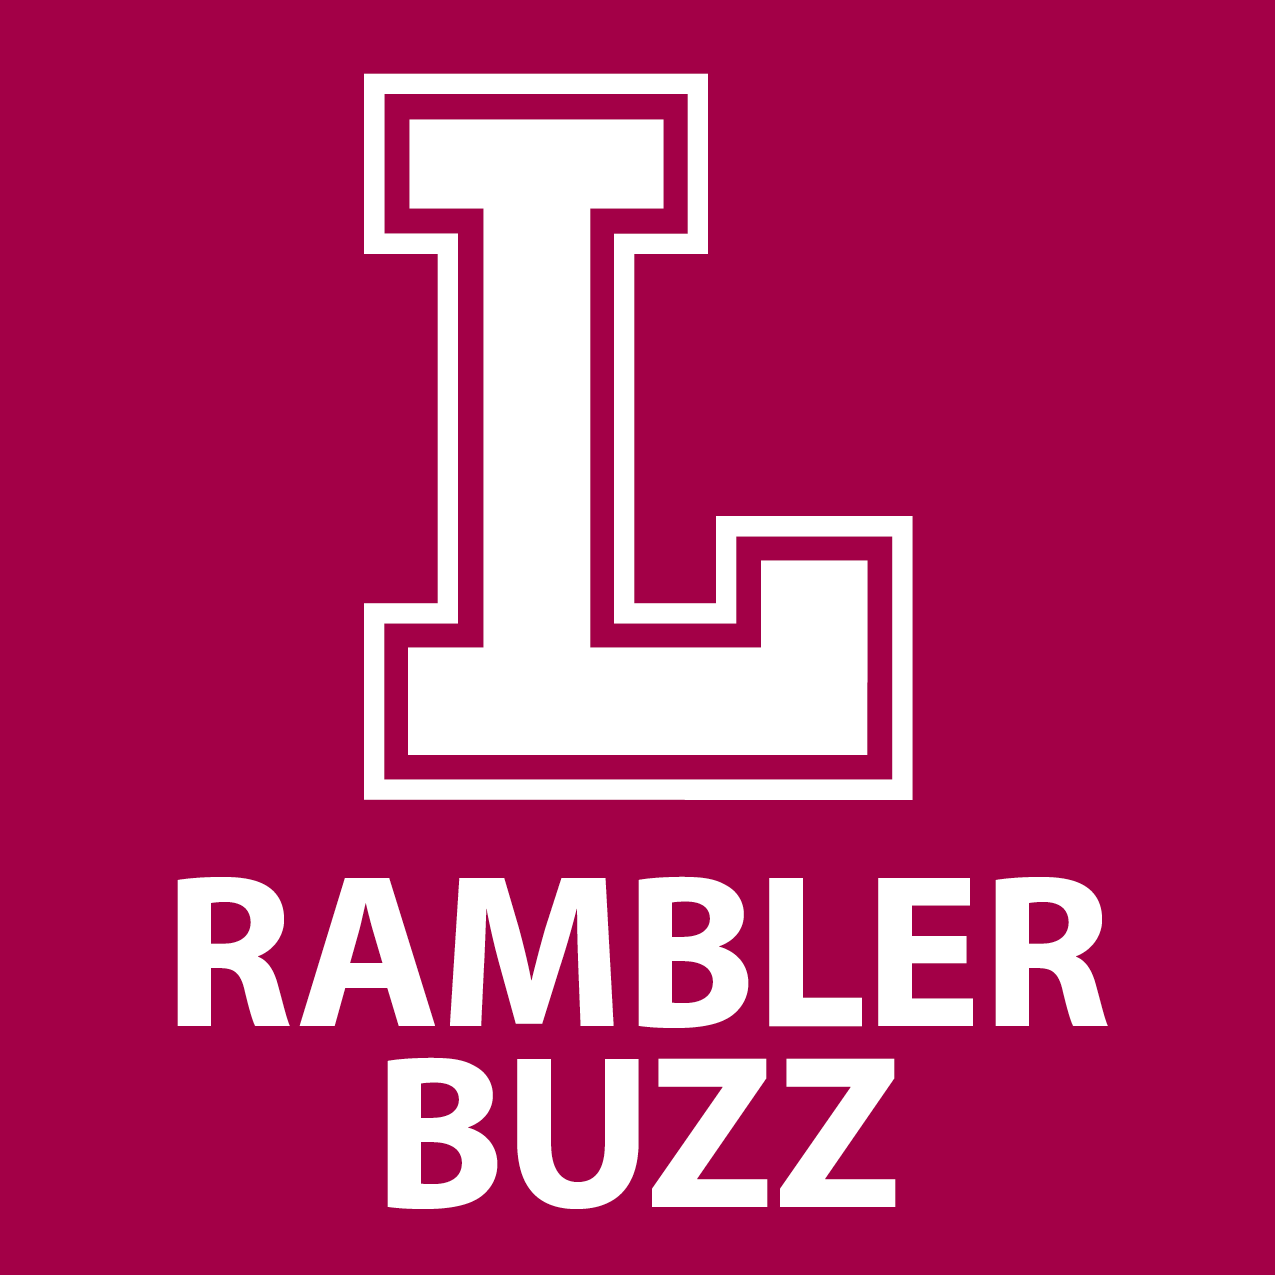 Welcome to the official Twitter account of Rambler Buzz, the place for Loyola University Chicago student news and events.